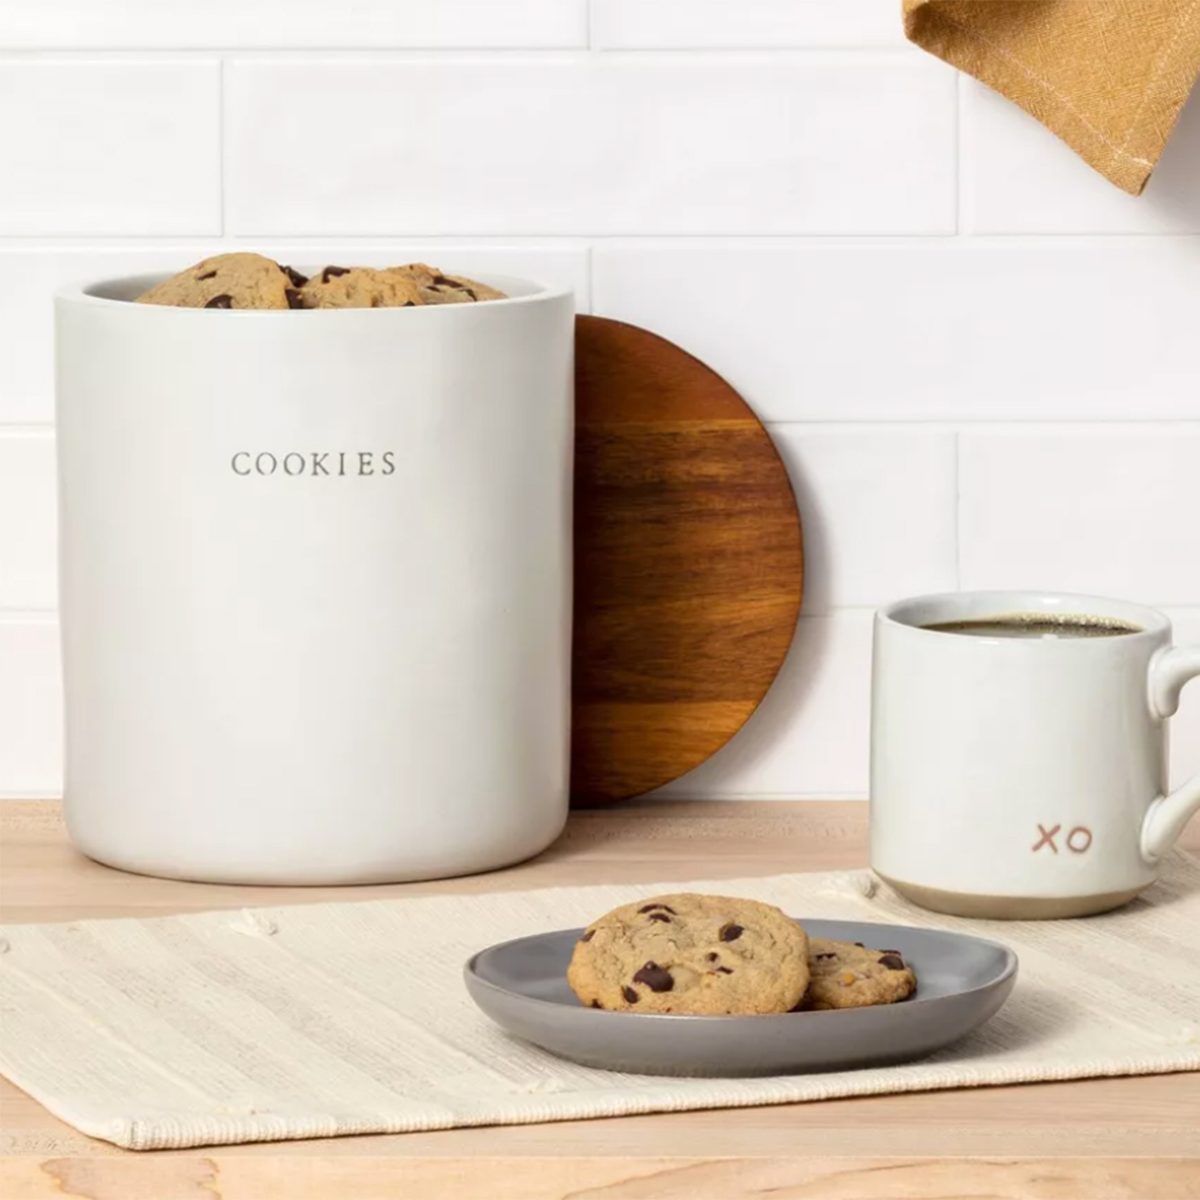 17 Perfect Gifts for Cookie Lovers + Bakers - Cooking With Karli